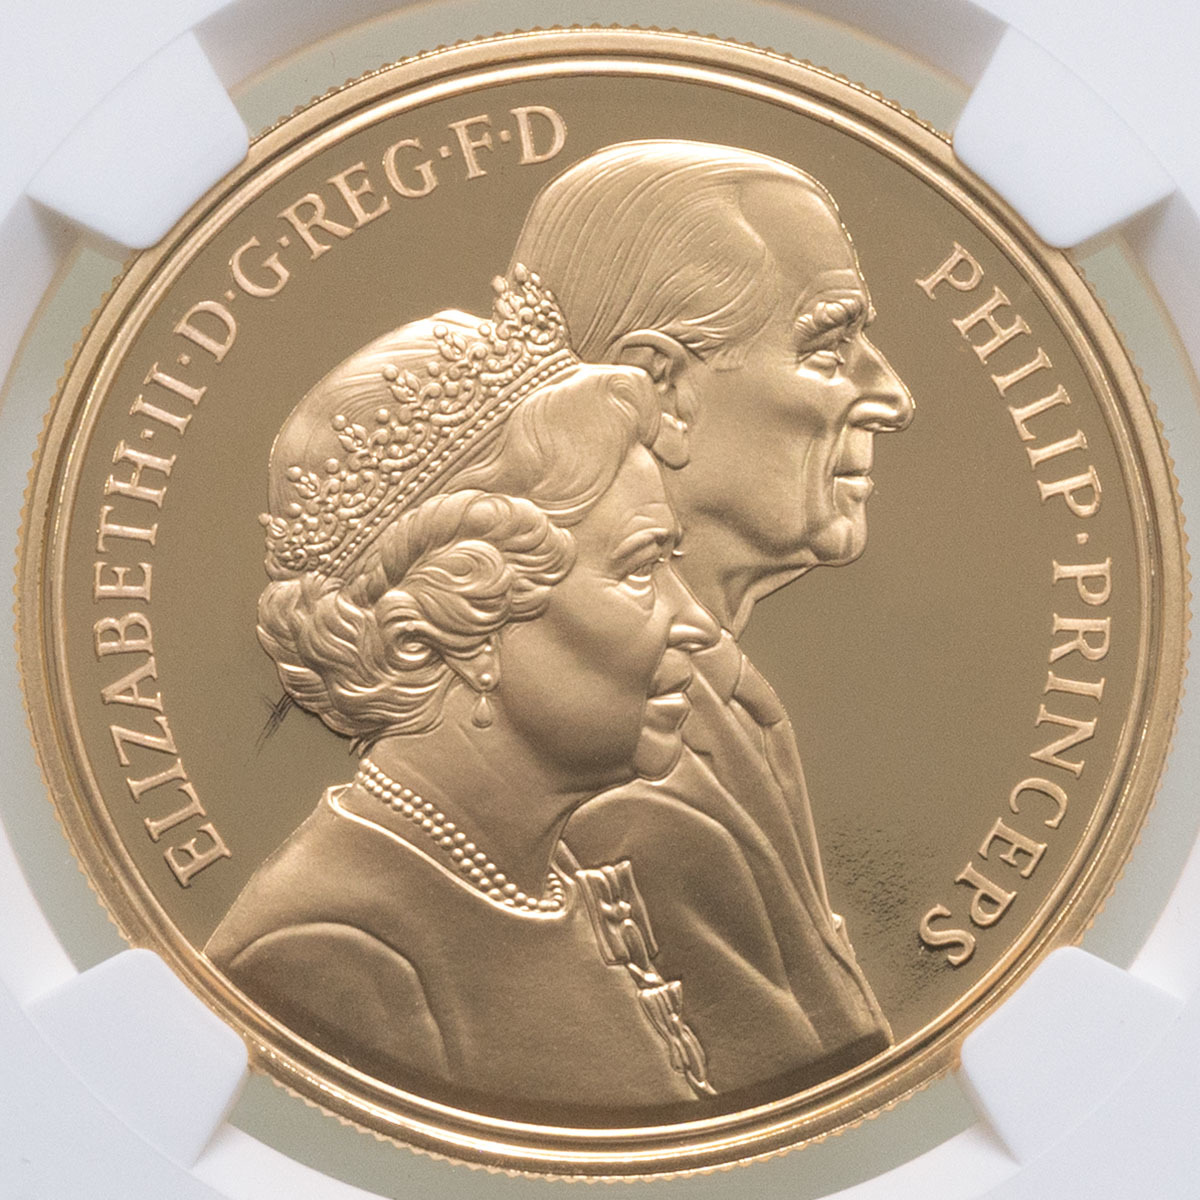 1997 Golden Wedding Anniversary Five Pound Crown Gold Proof Coin NGC Graded PF 70 Ultra Cameo Obverse